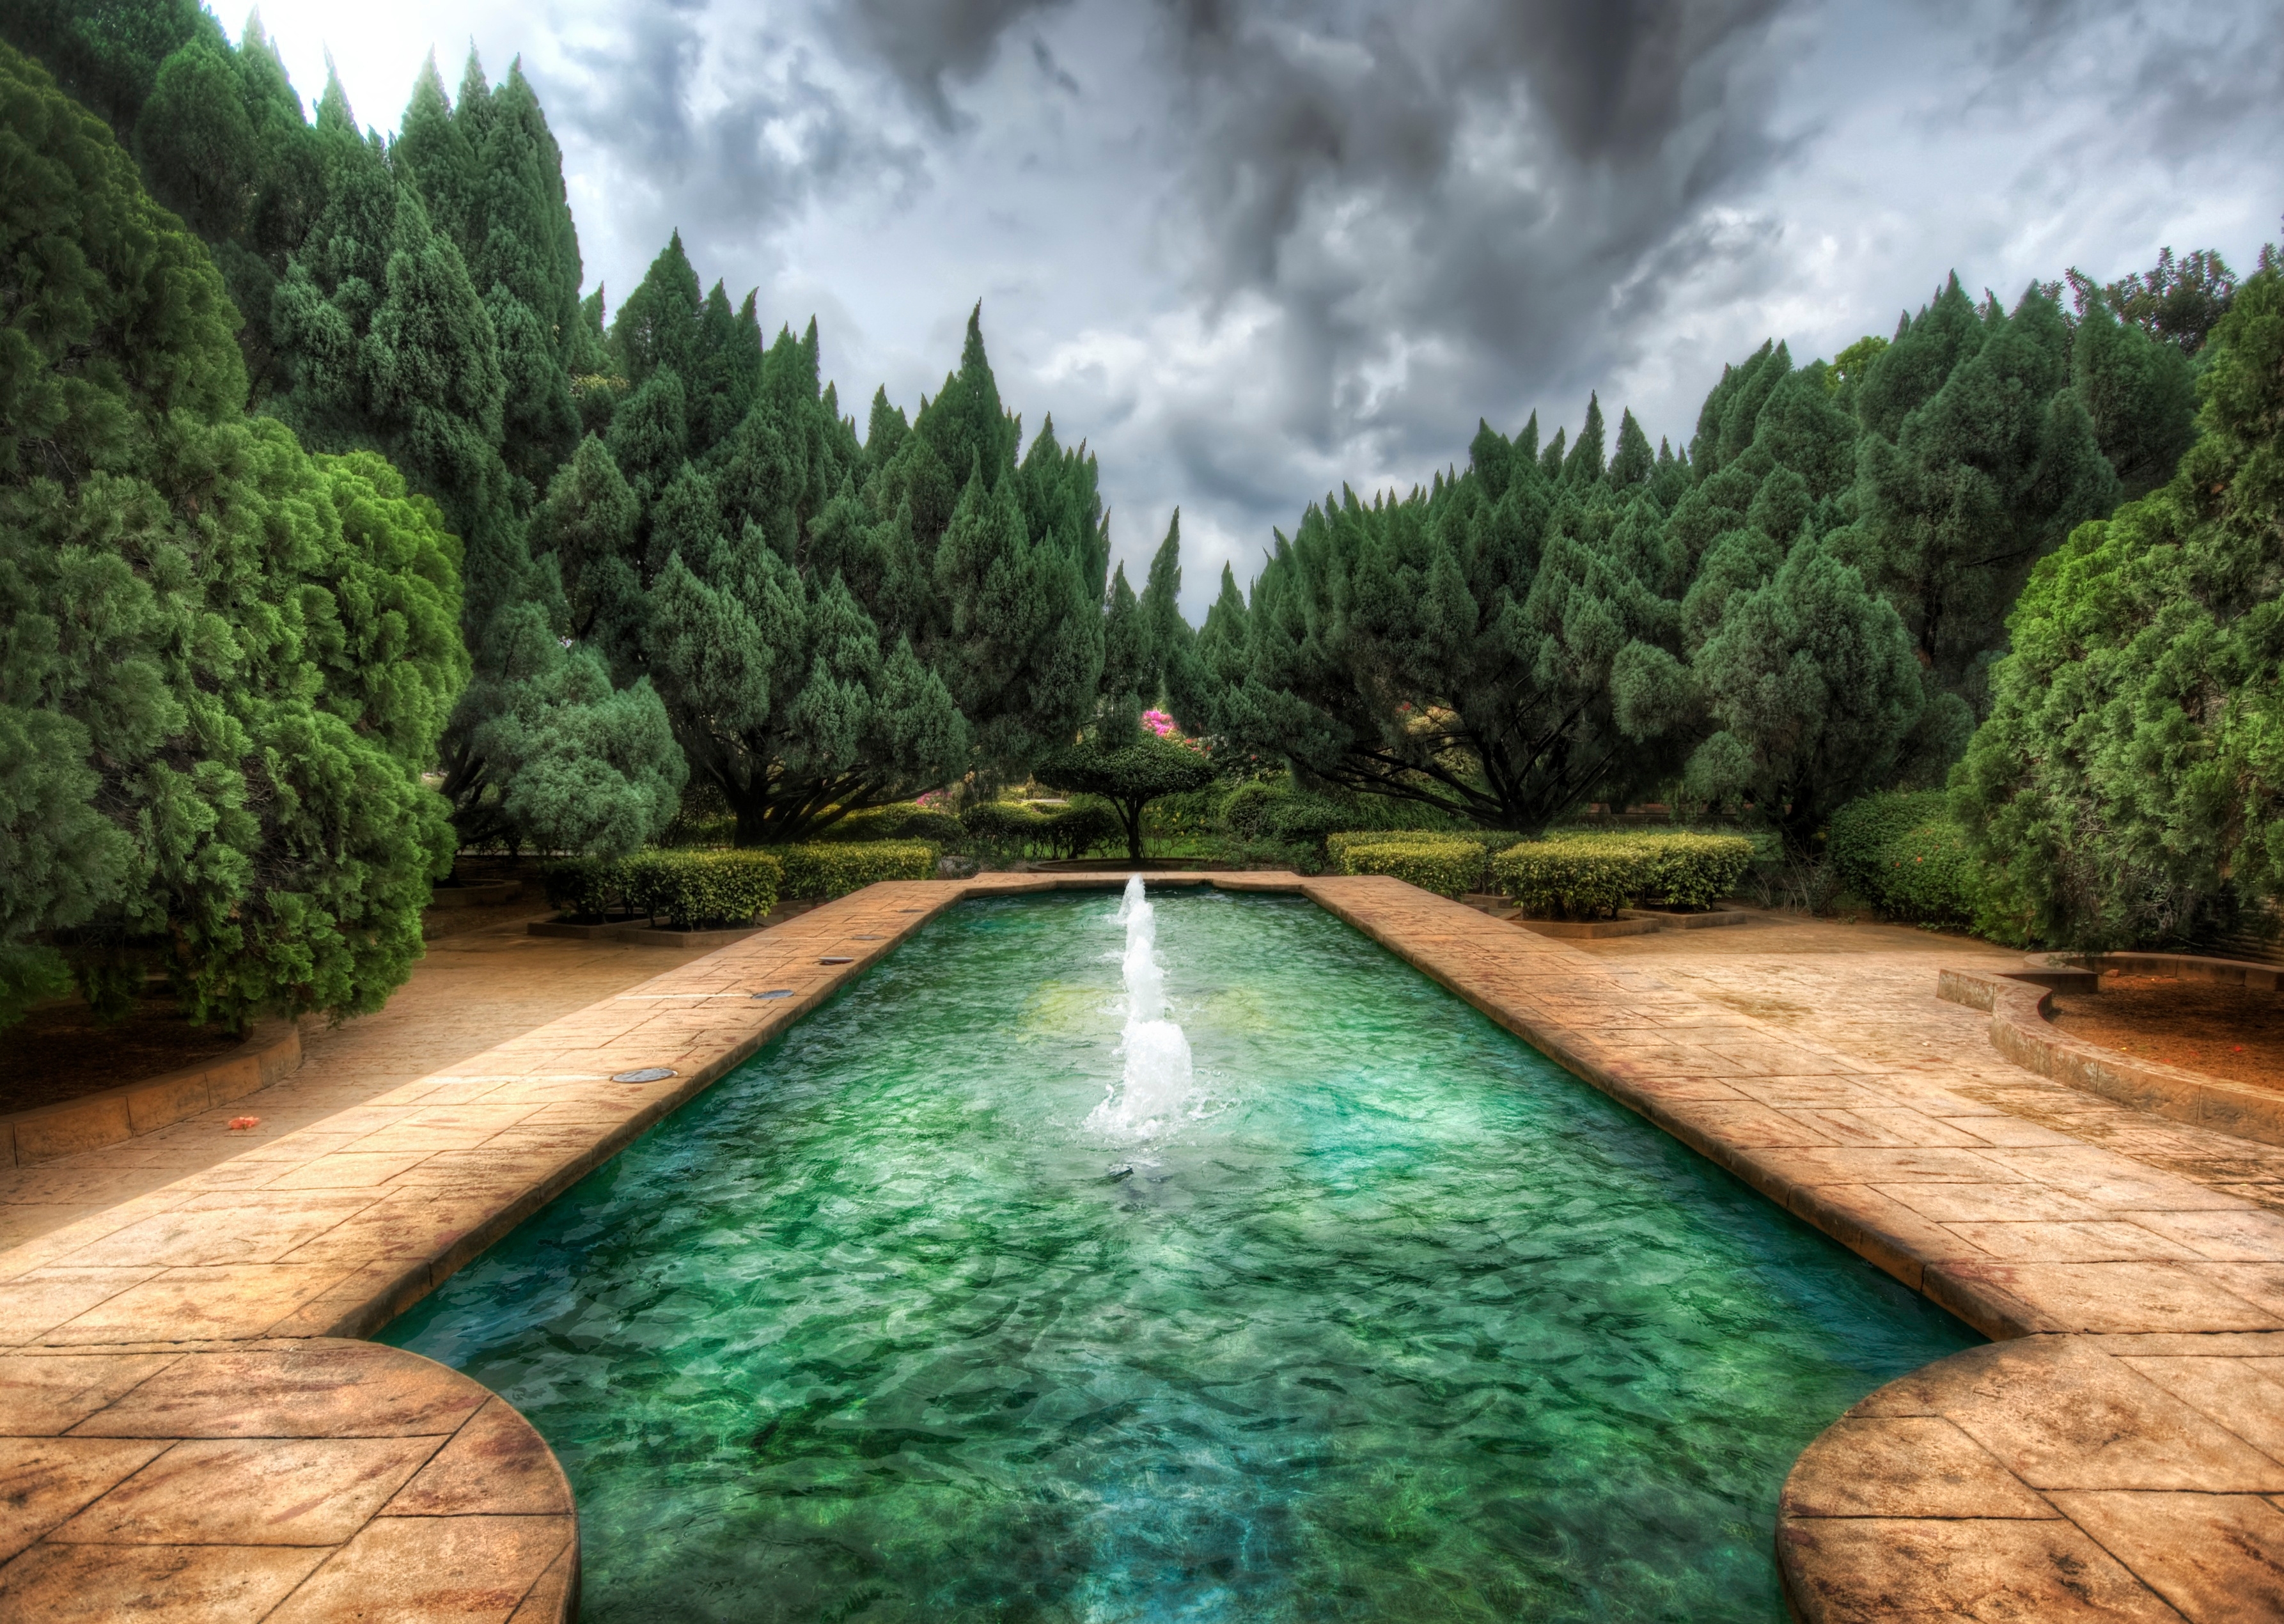 color, overcast, pool, forest, mainly cloudy, paints, fountain, nature, colors High Definition image